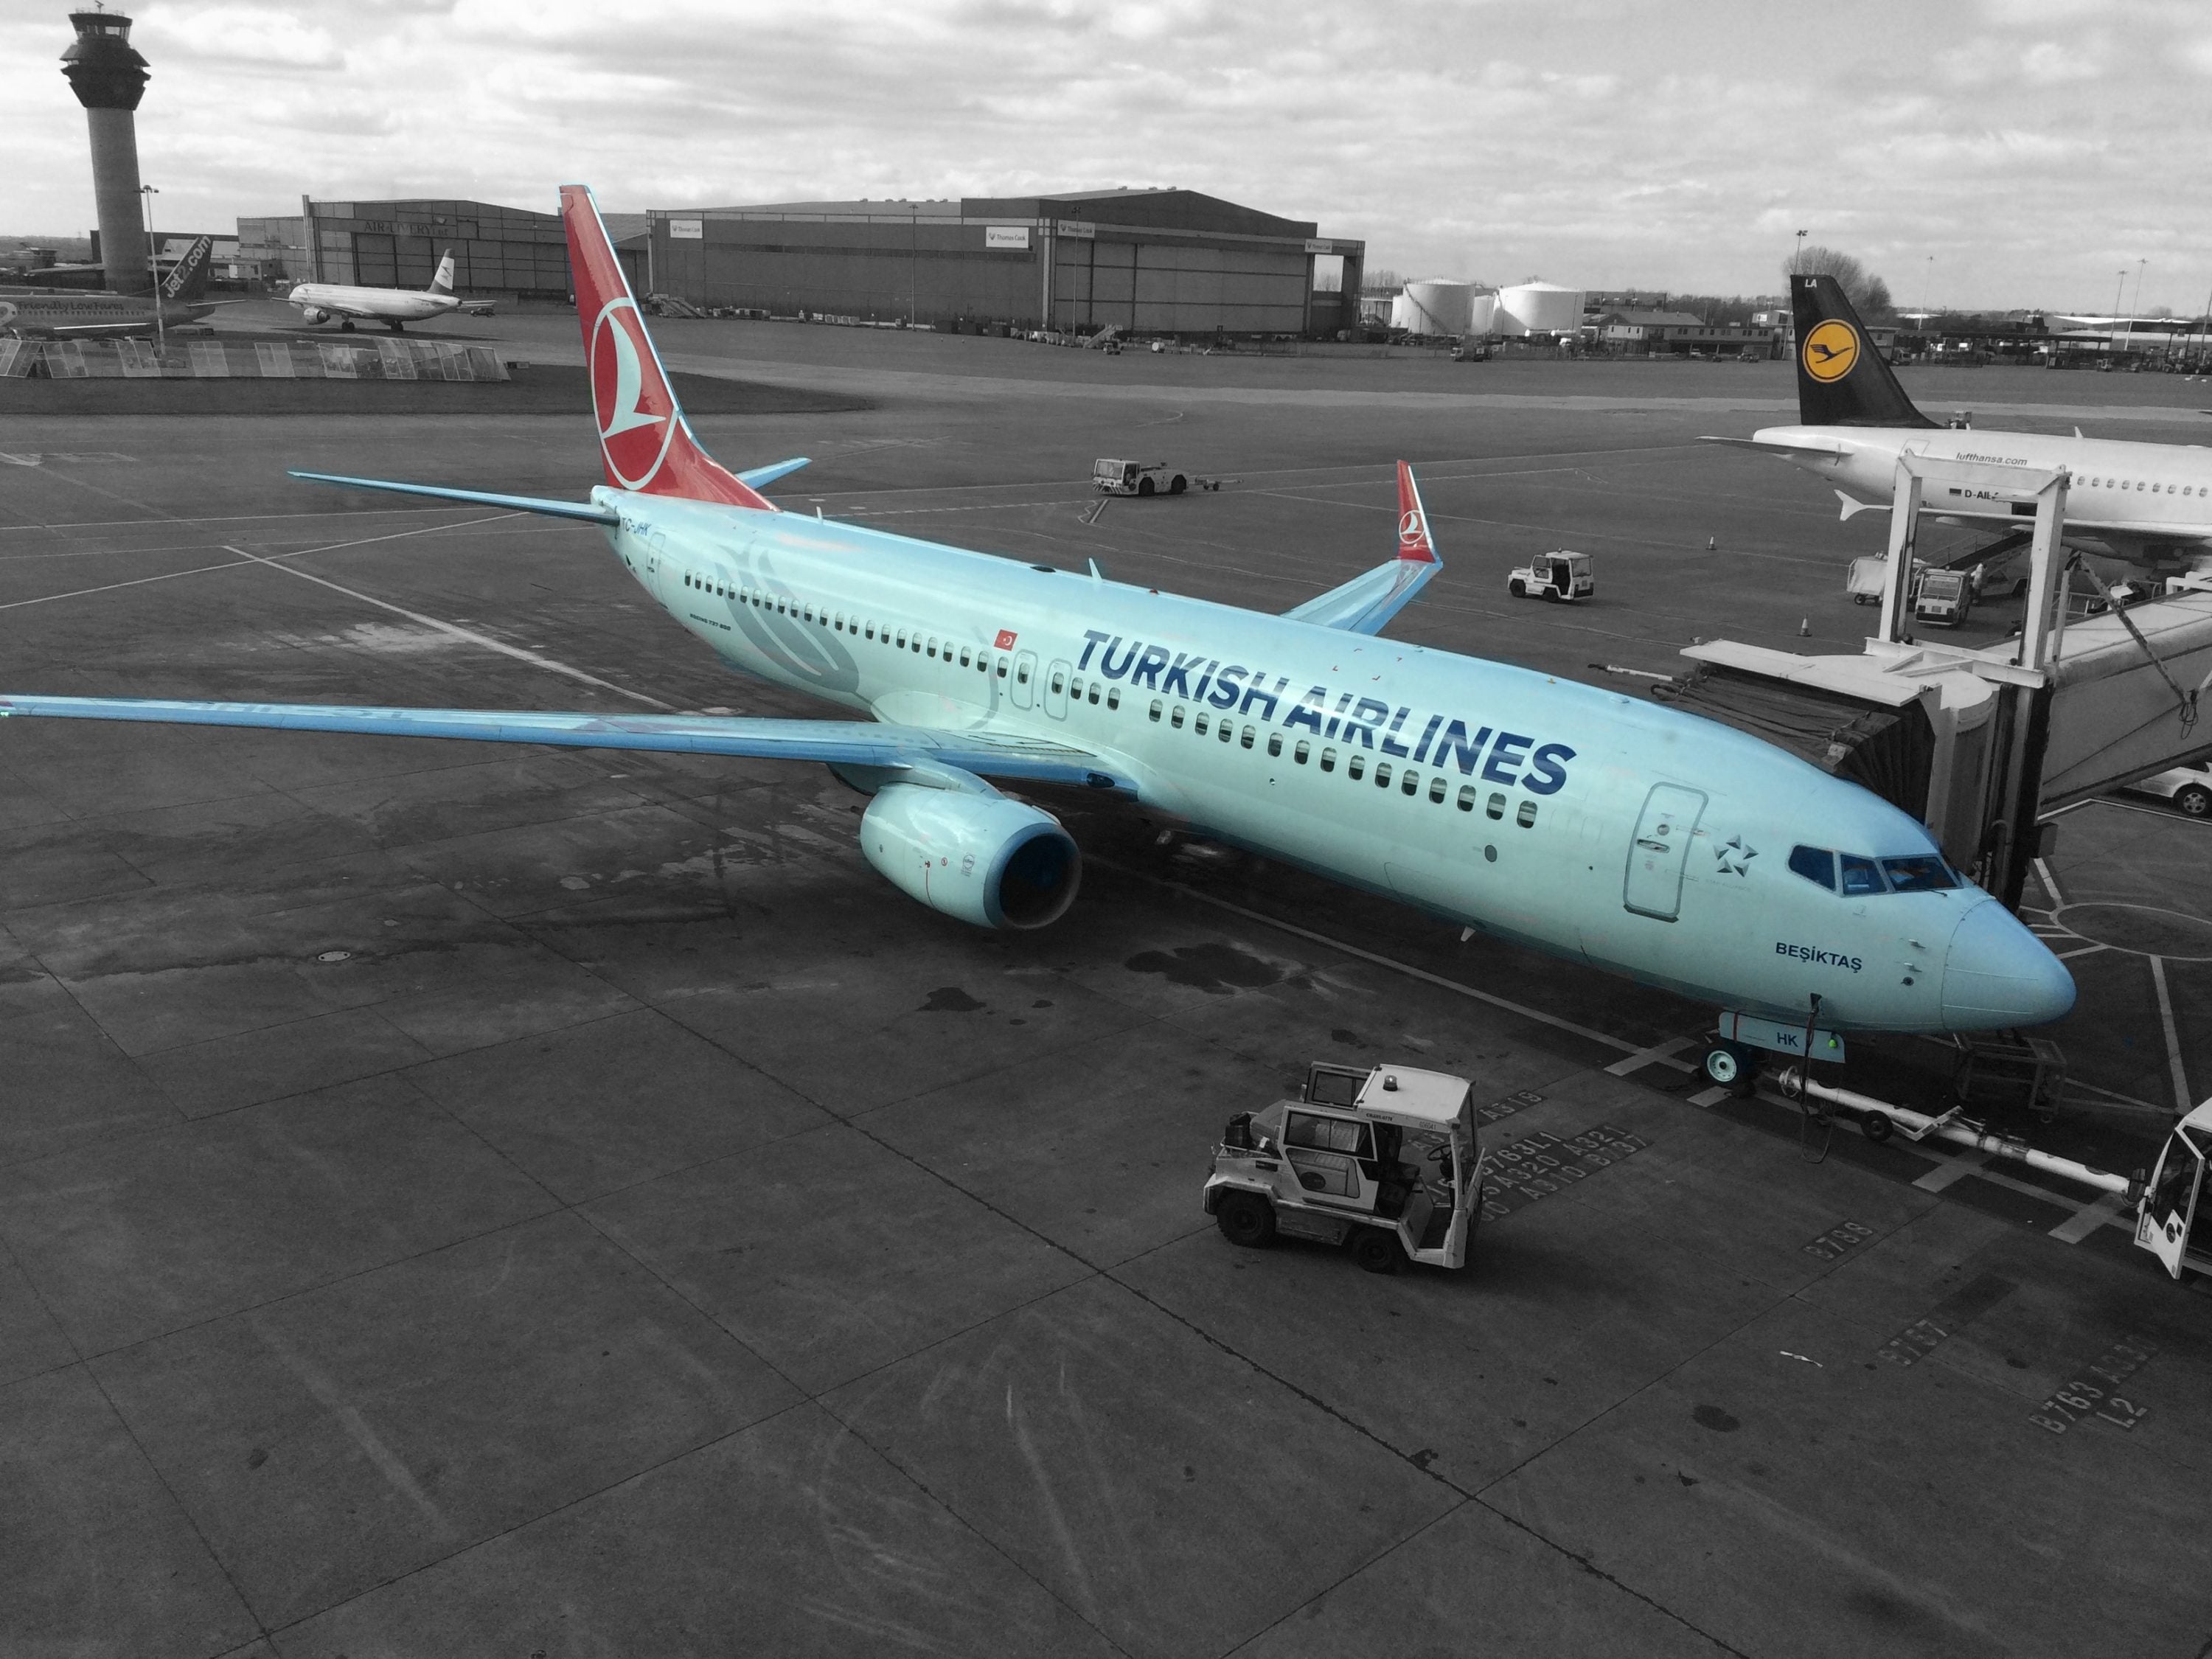 Turkish Airlines plane at gate